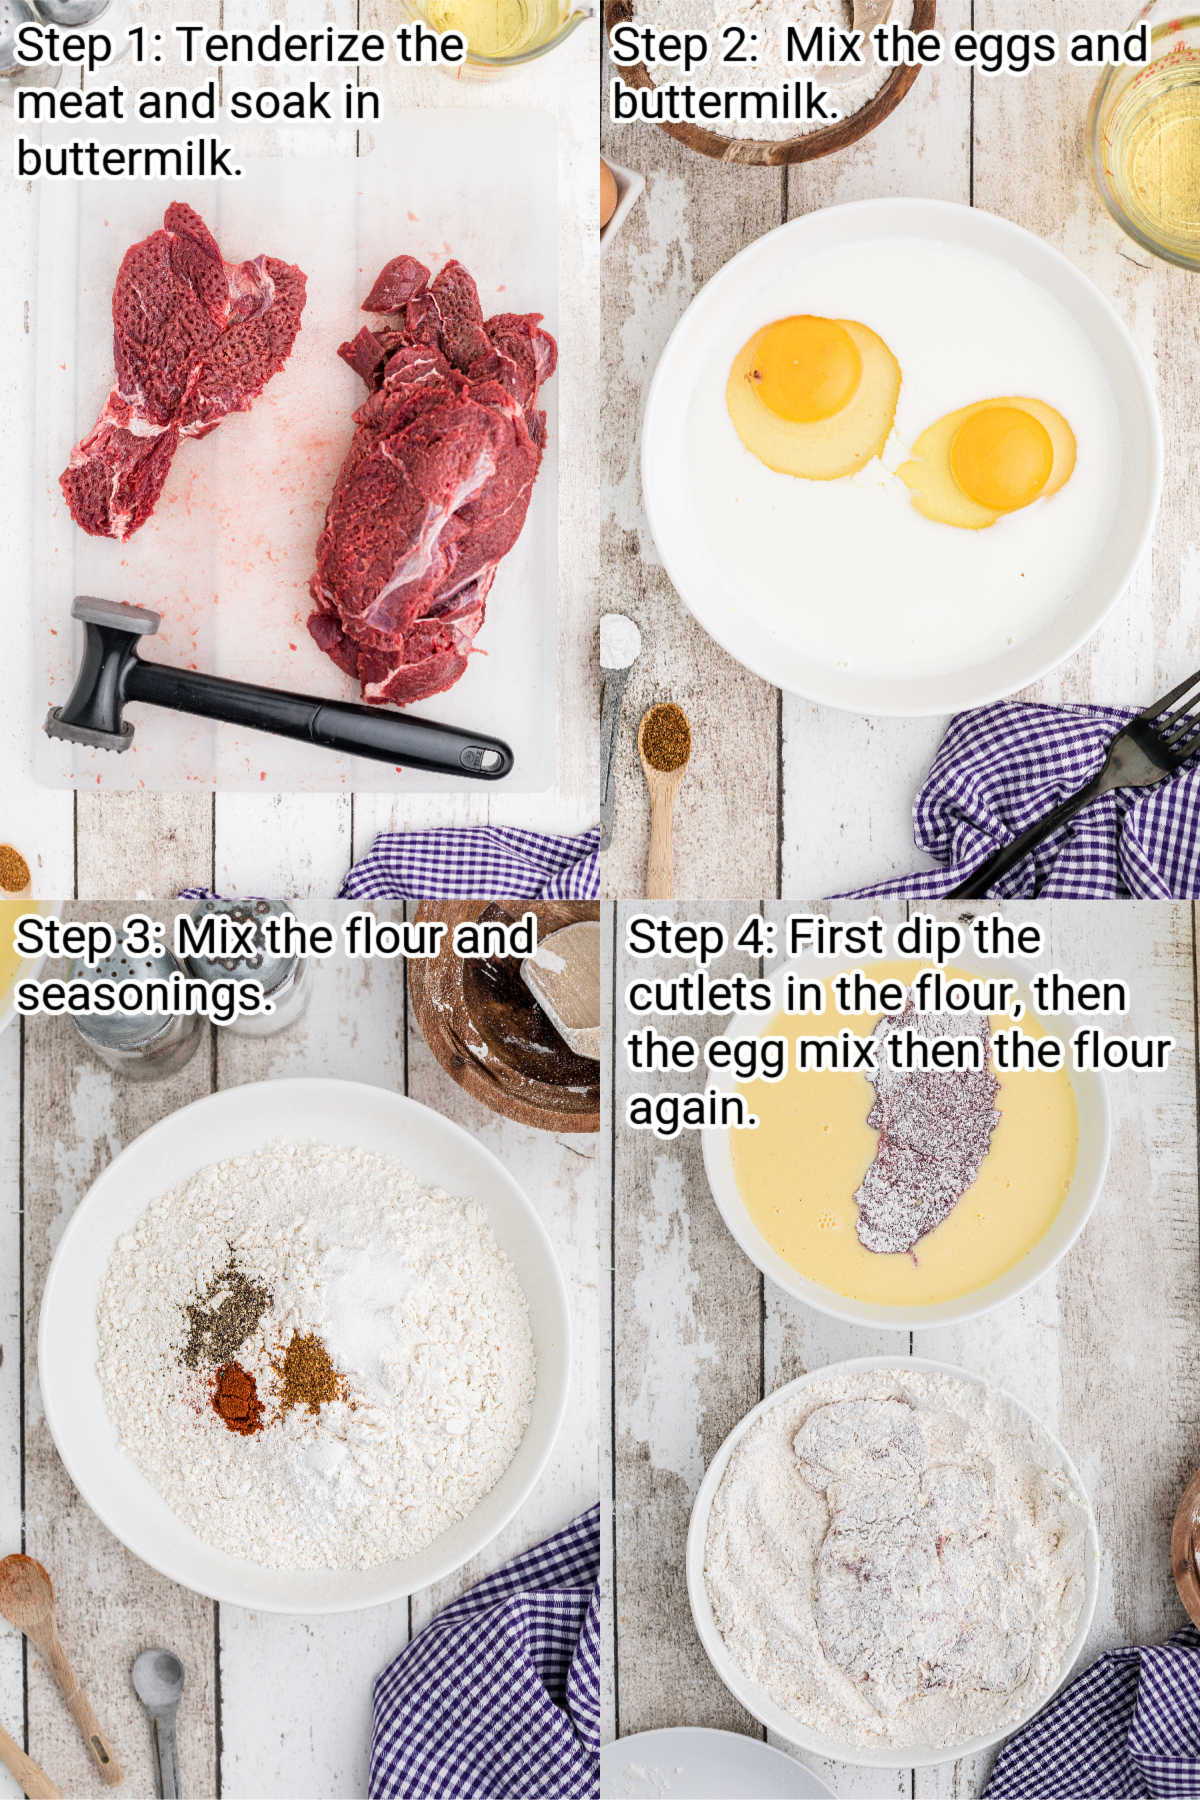 four images showing how to make venison cutlets